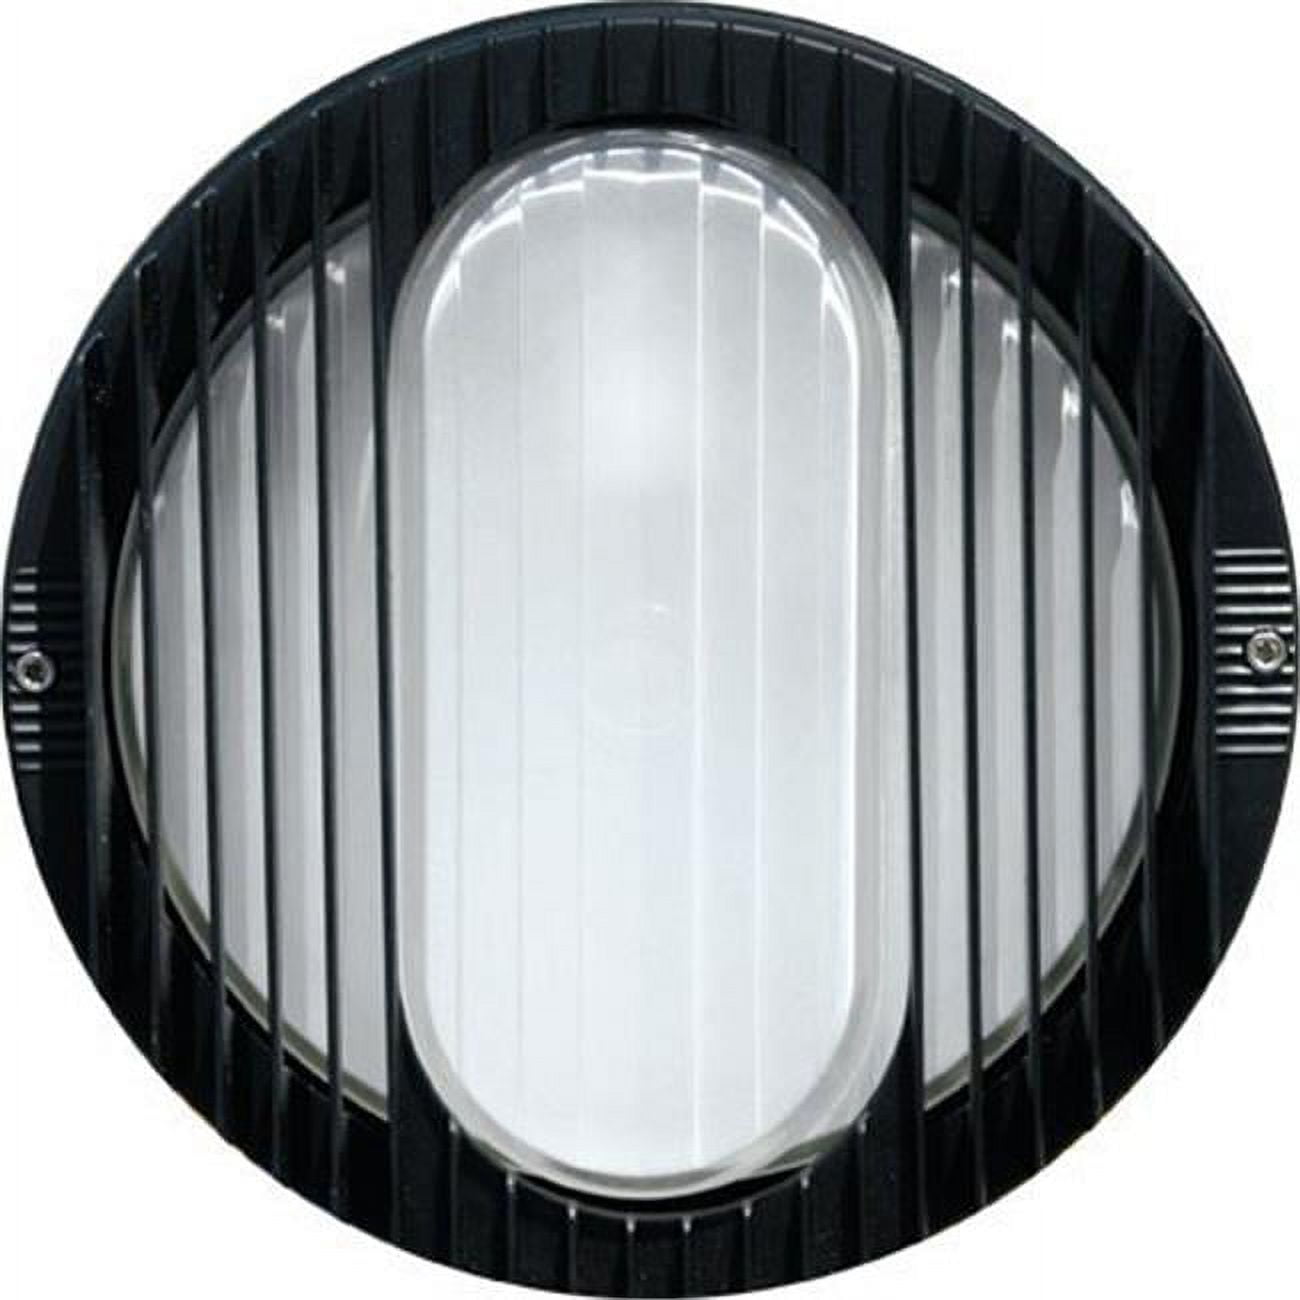 Picture of Dabmar Lighting W3063-B Surface Mount Wall Fixture - 13W 120V, Black